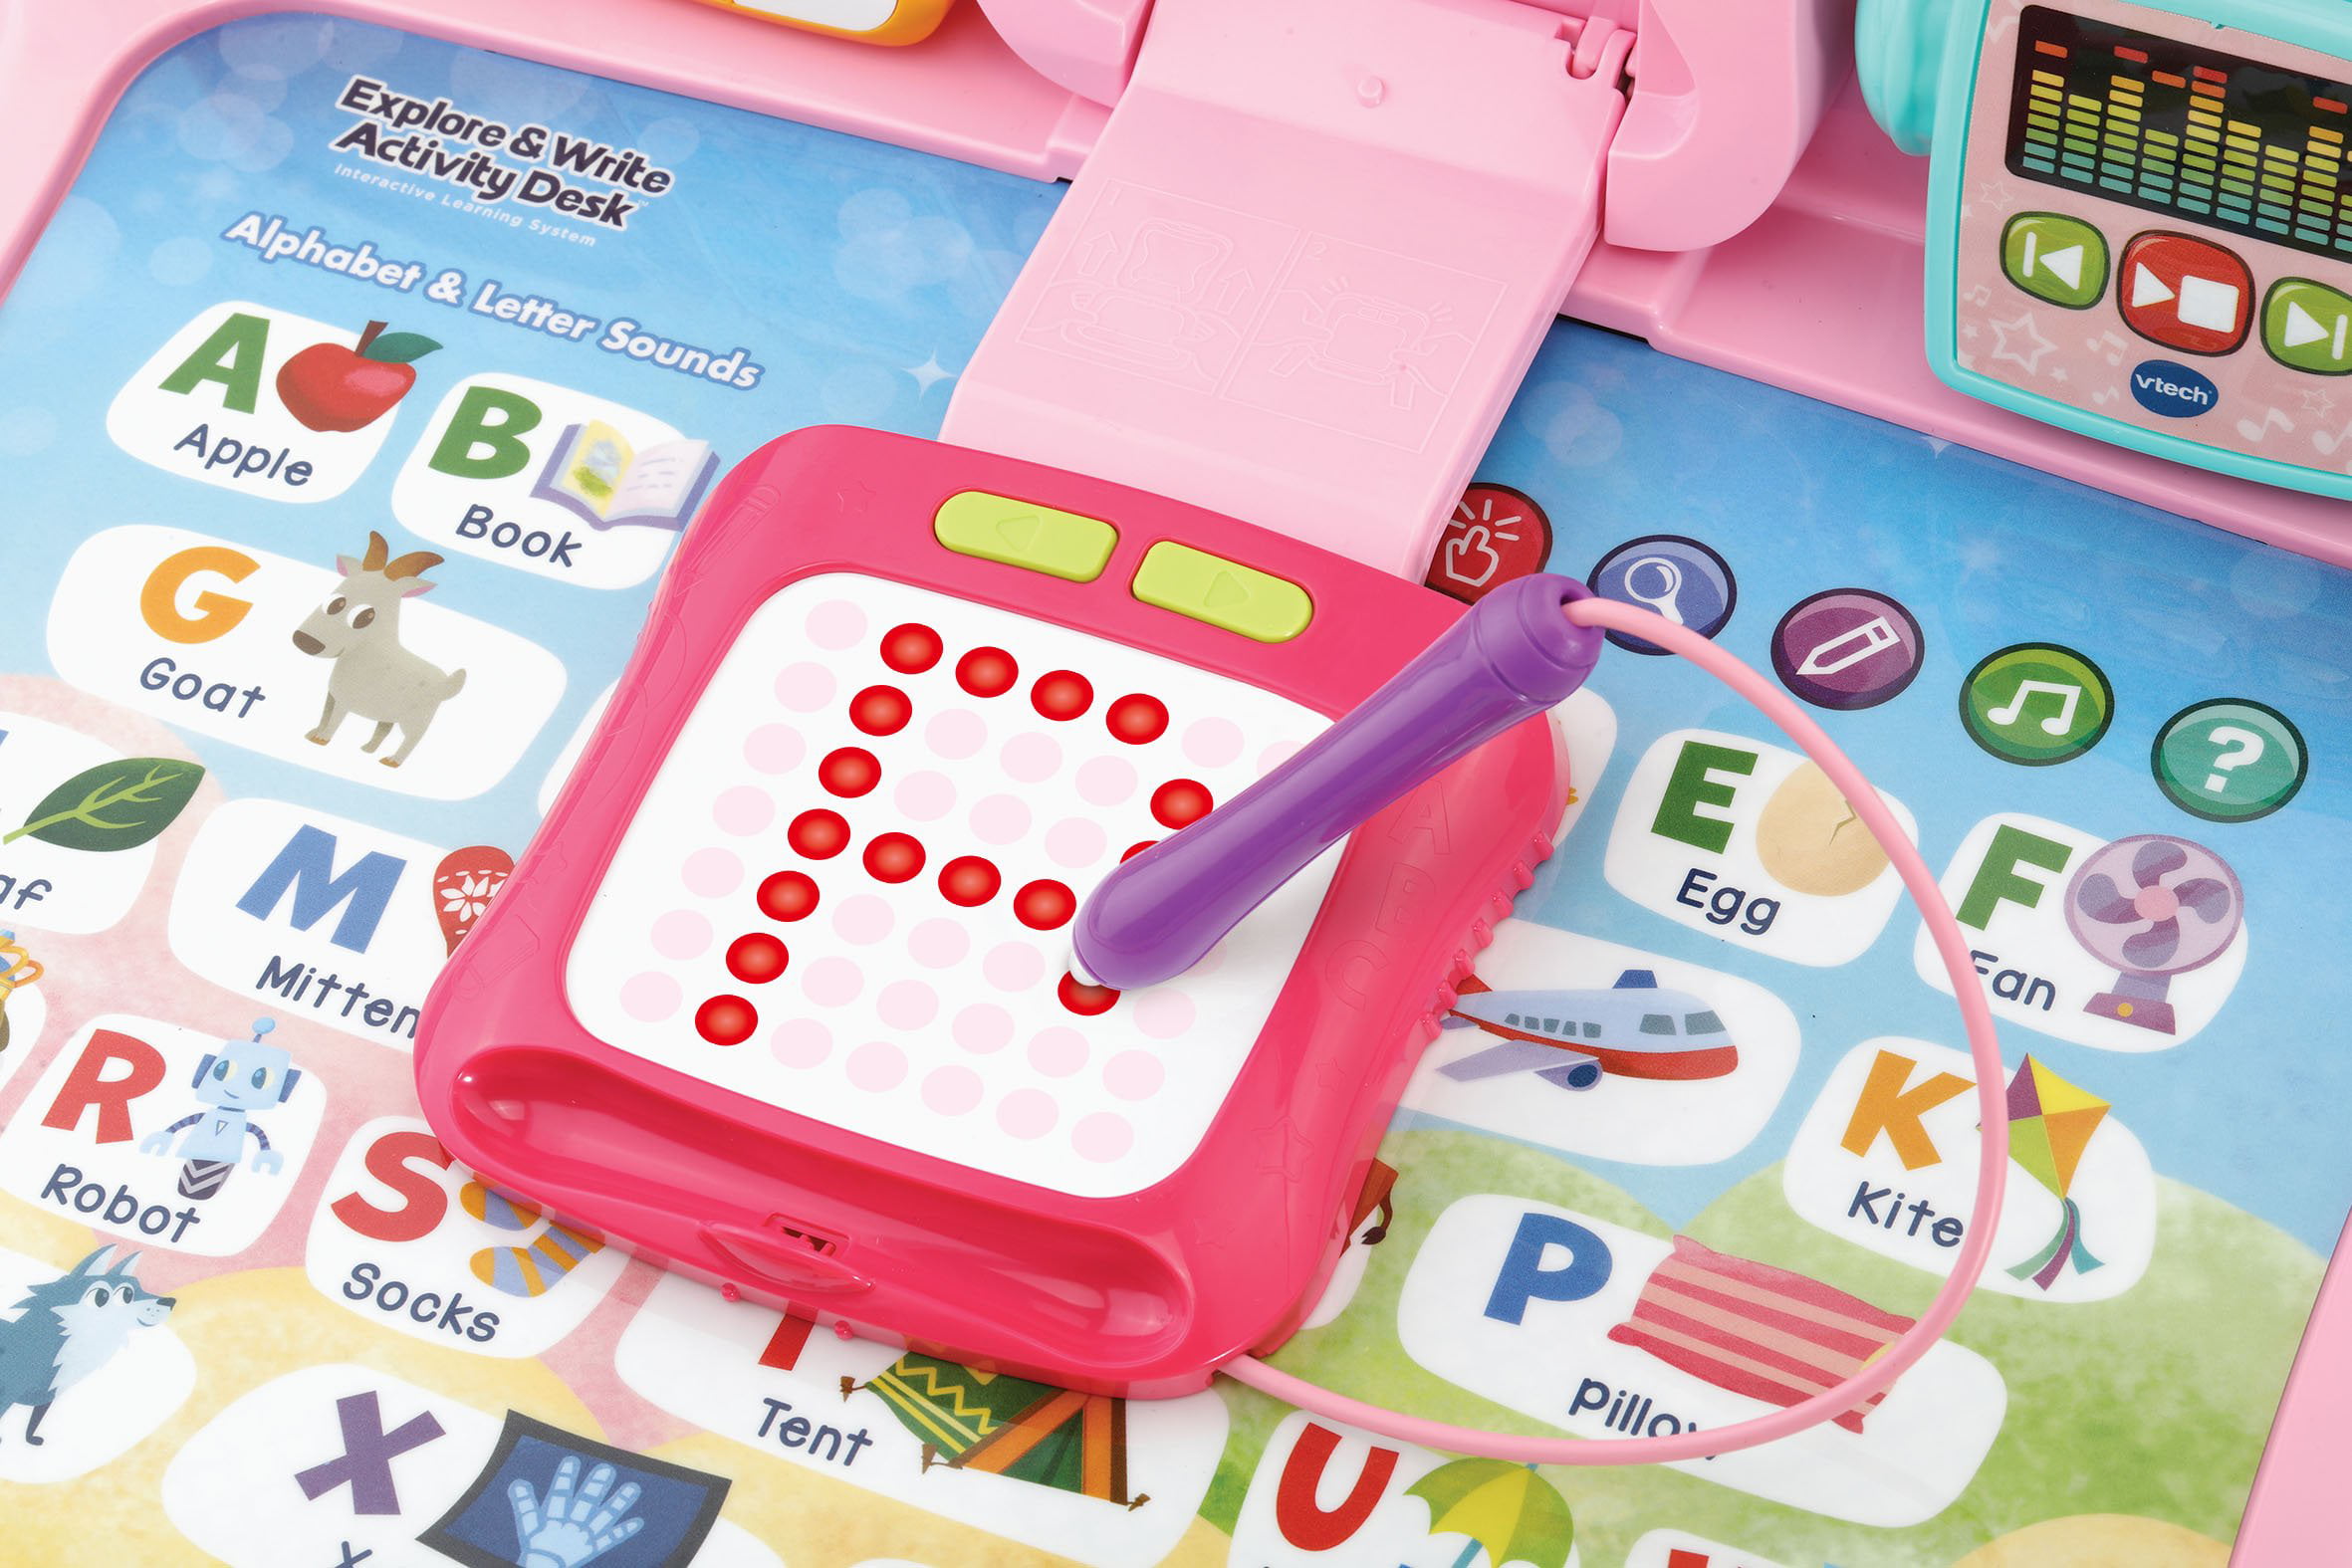 Details about   VTech Explore & Write Kids Fun Play Interactive Teaching Toy Activity Desk Pink 